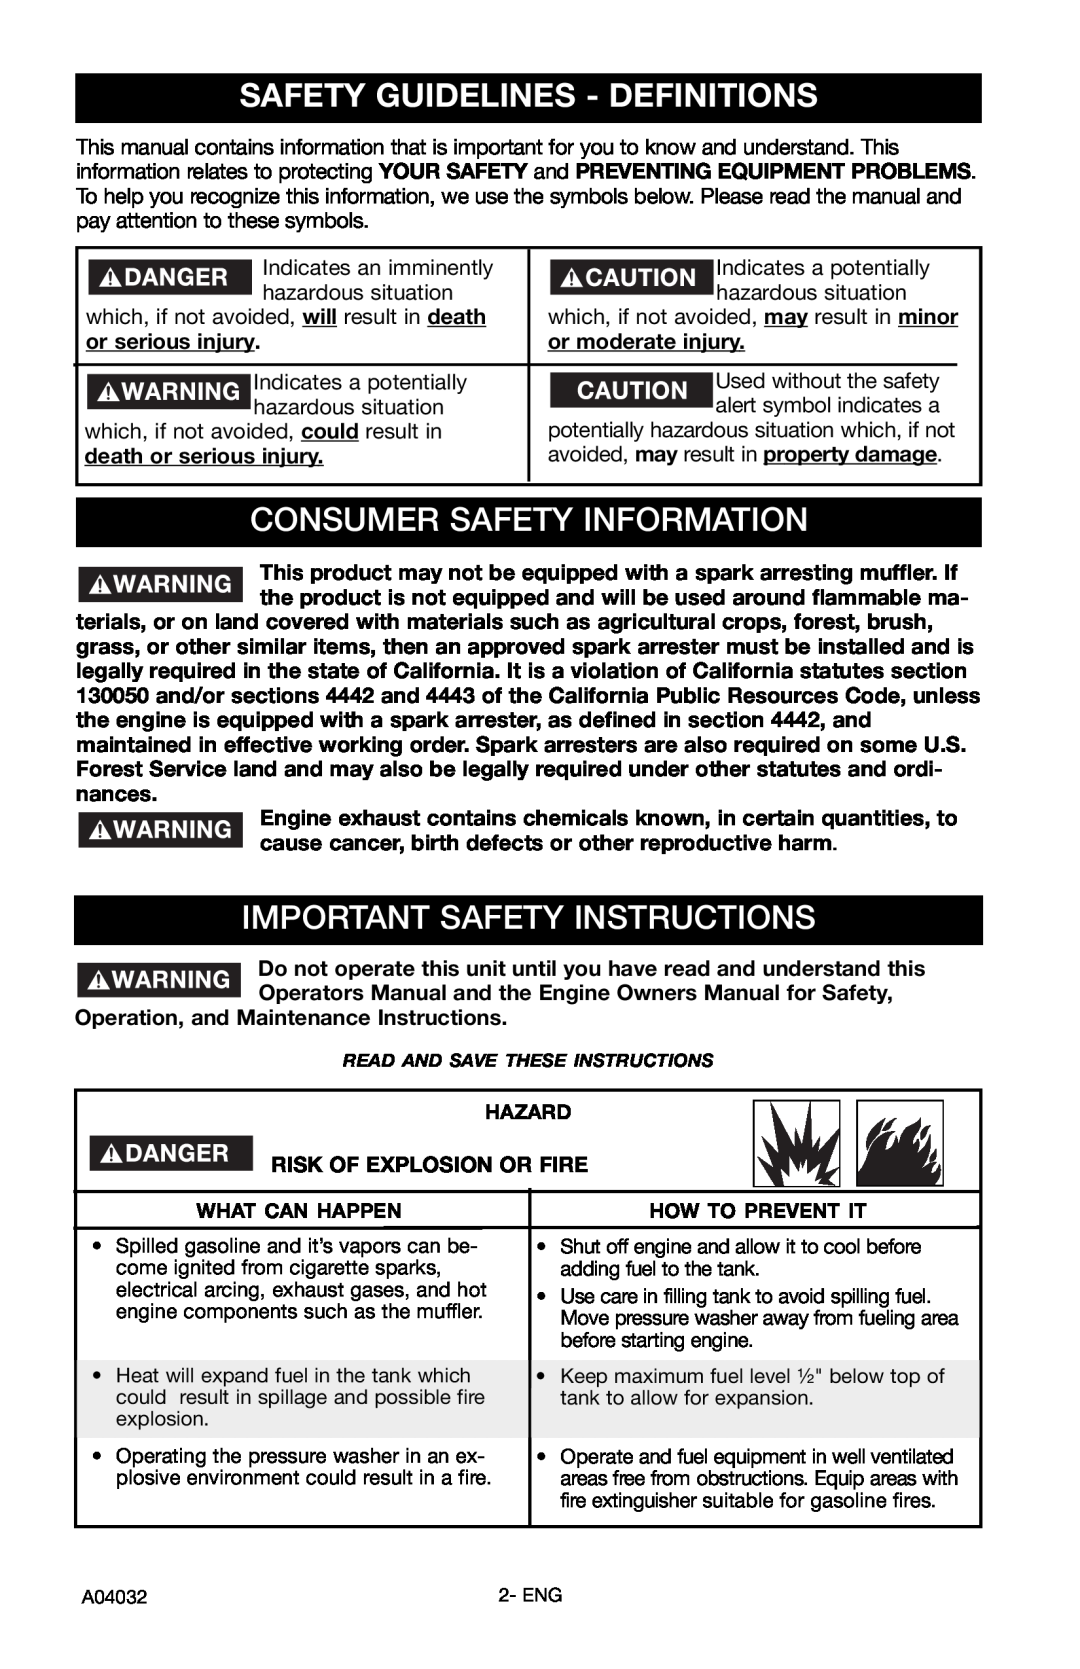 Delta DTT2450 Safety Guidelines - Definitions, Consumer Safety Information, Important Safety Instructions 